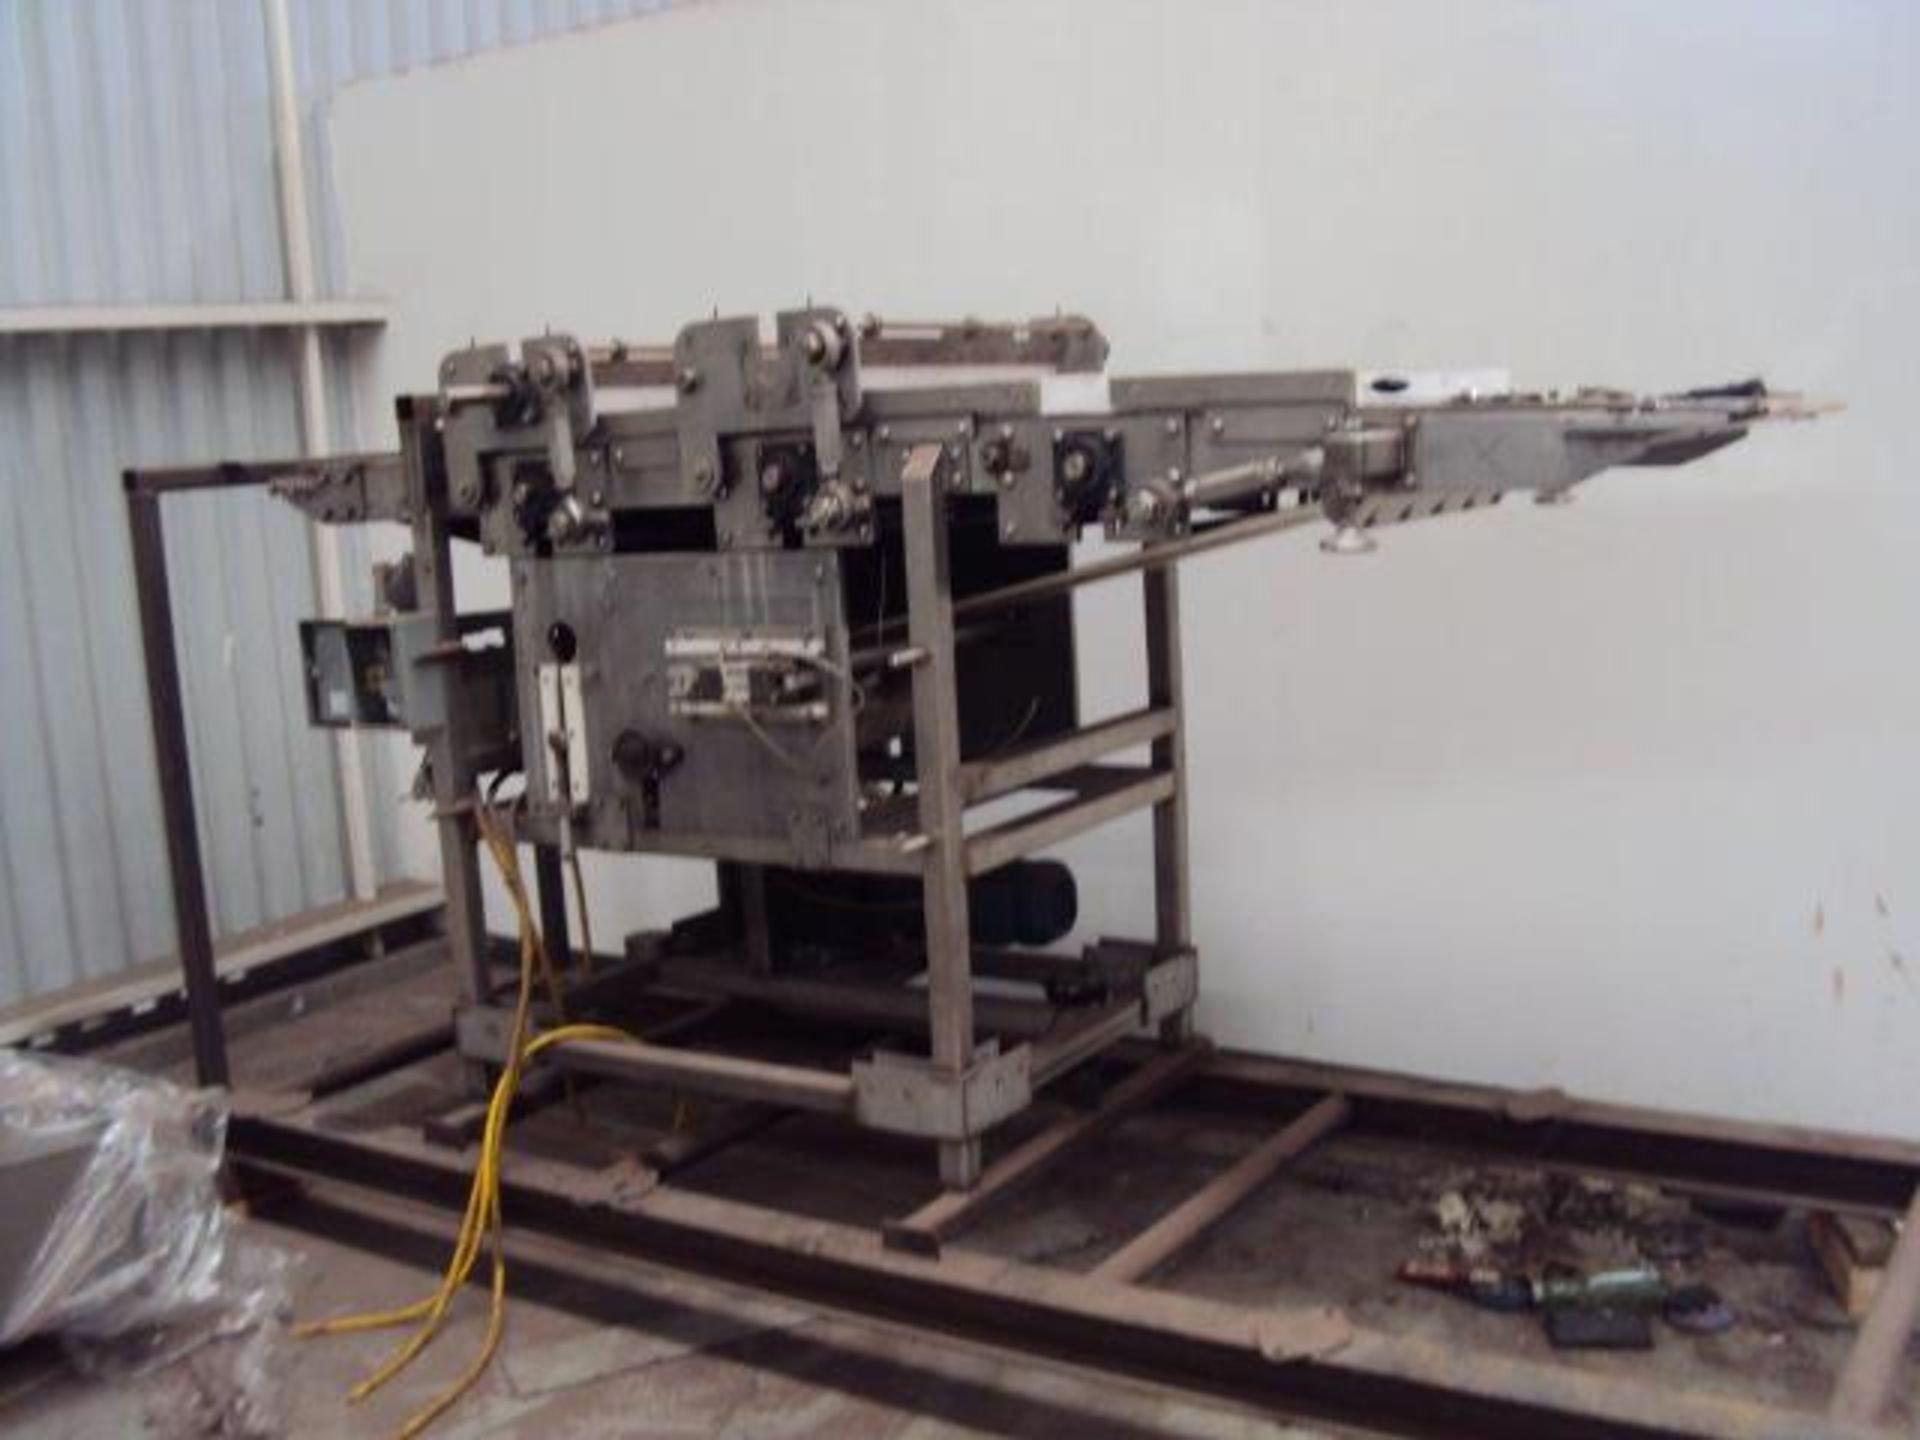 All Food Equipment Bar Forming Line, 32" Wide, Rigging and Loading Fee: $300 Crates and P